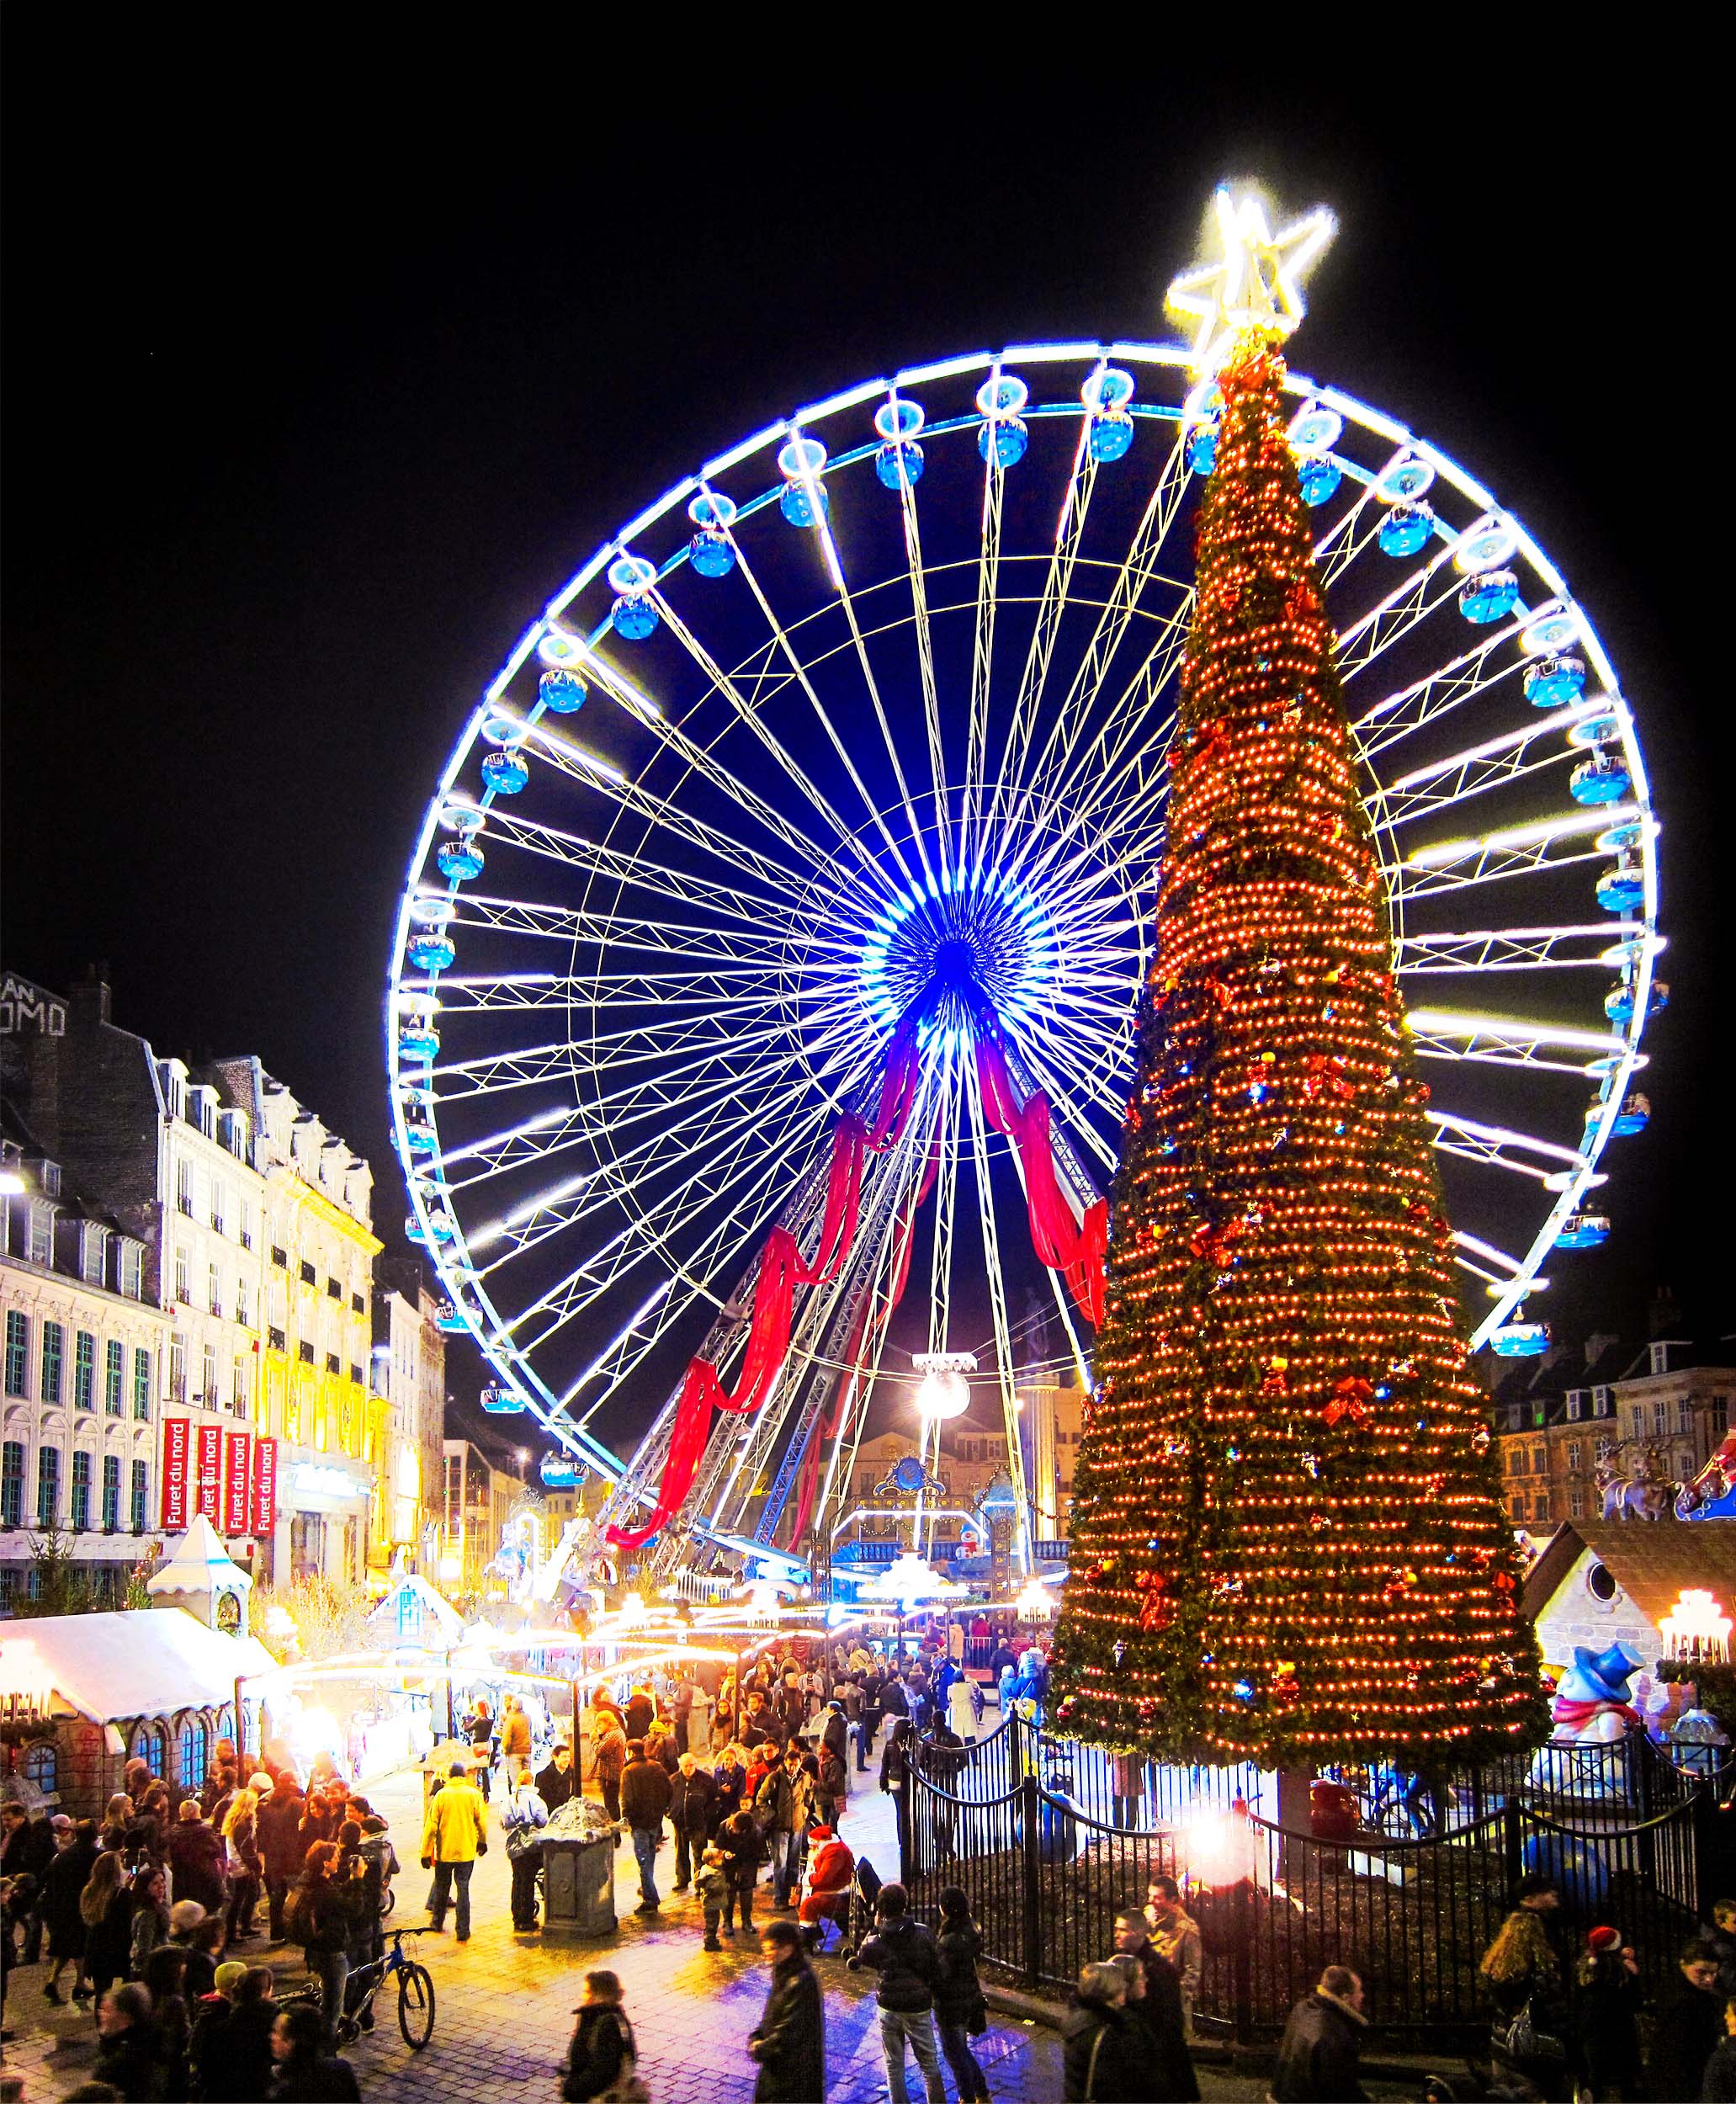 Lille à Noël © Velvet - licence [CC BY-SA 3.0] from Wikimedia Commons